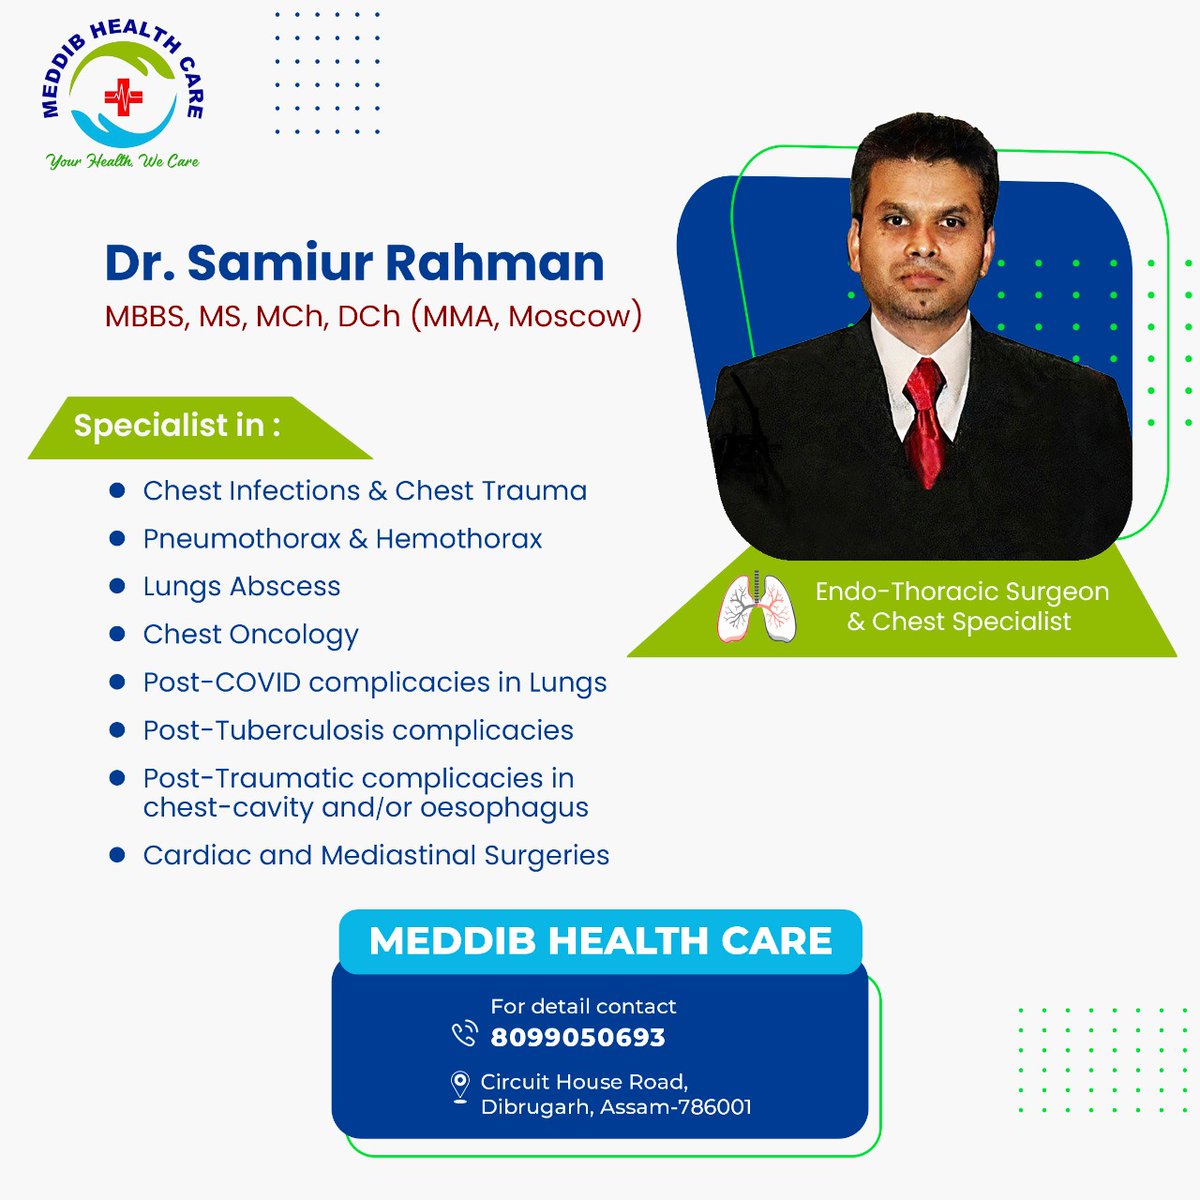 Dr.Samiur Rahman Endo-Tharacic Surgeon & Chest Specialist ,is available for consultation at MedDib health care Dibrugarh.
For detail contact : 8099050693
#meddibhealthcare #dibrugarh #Assam